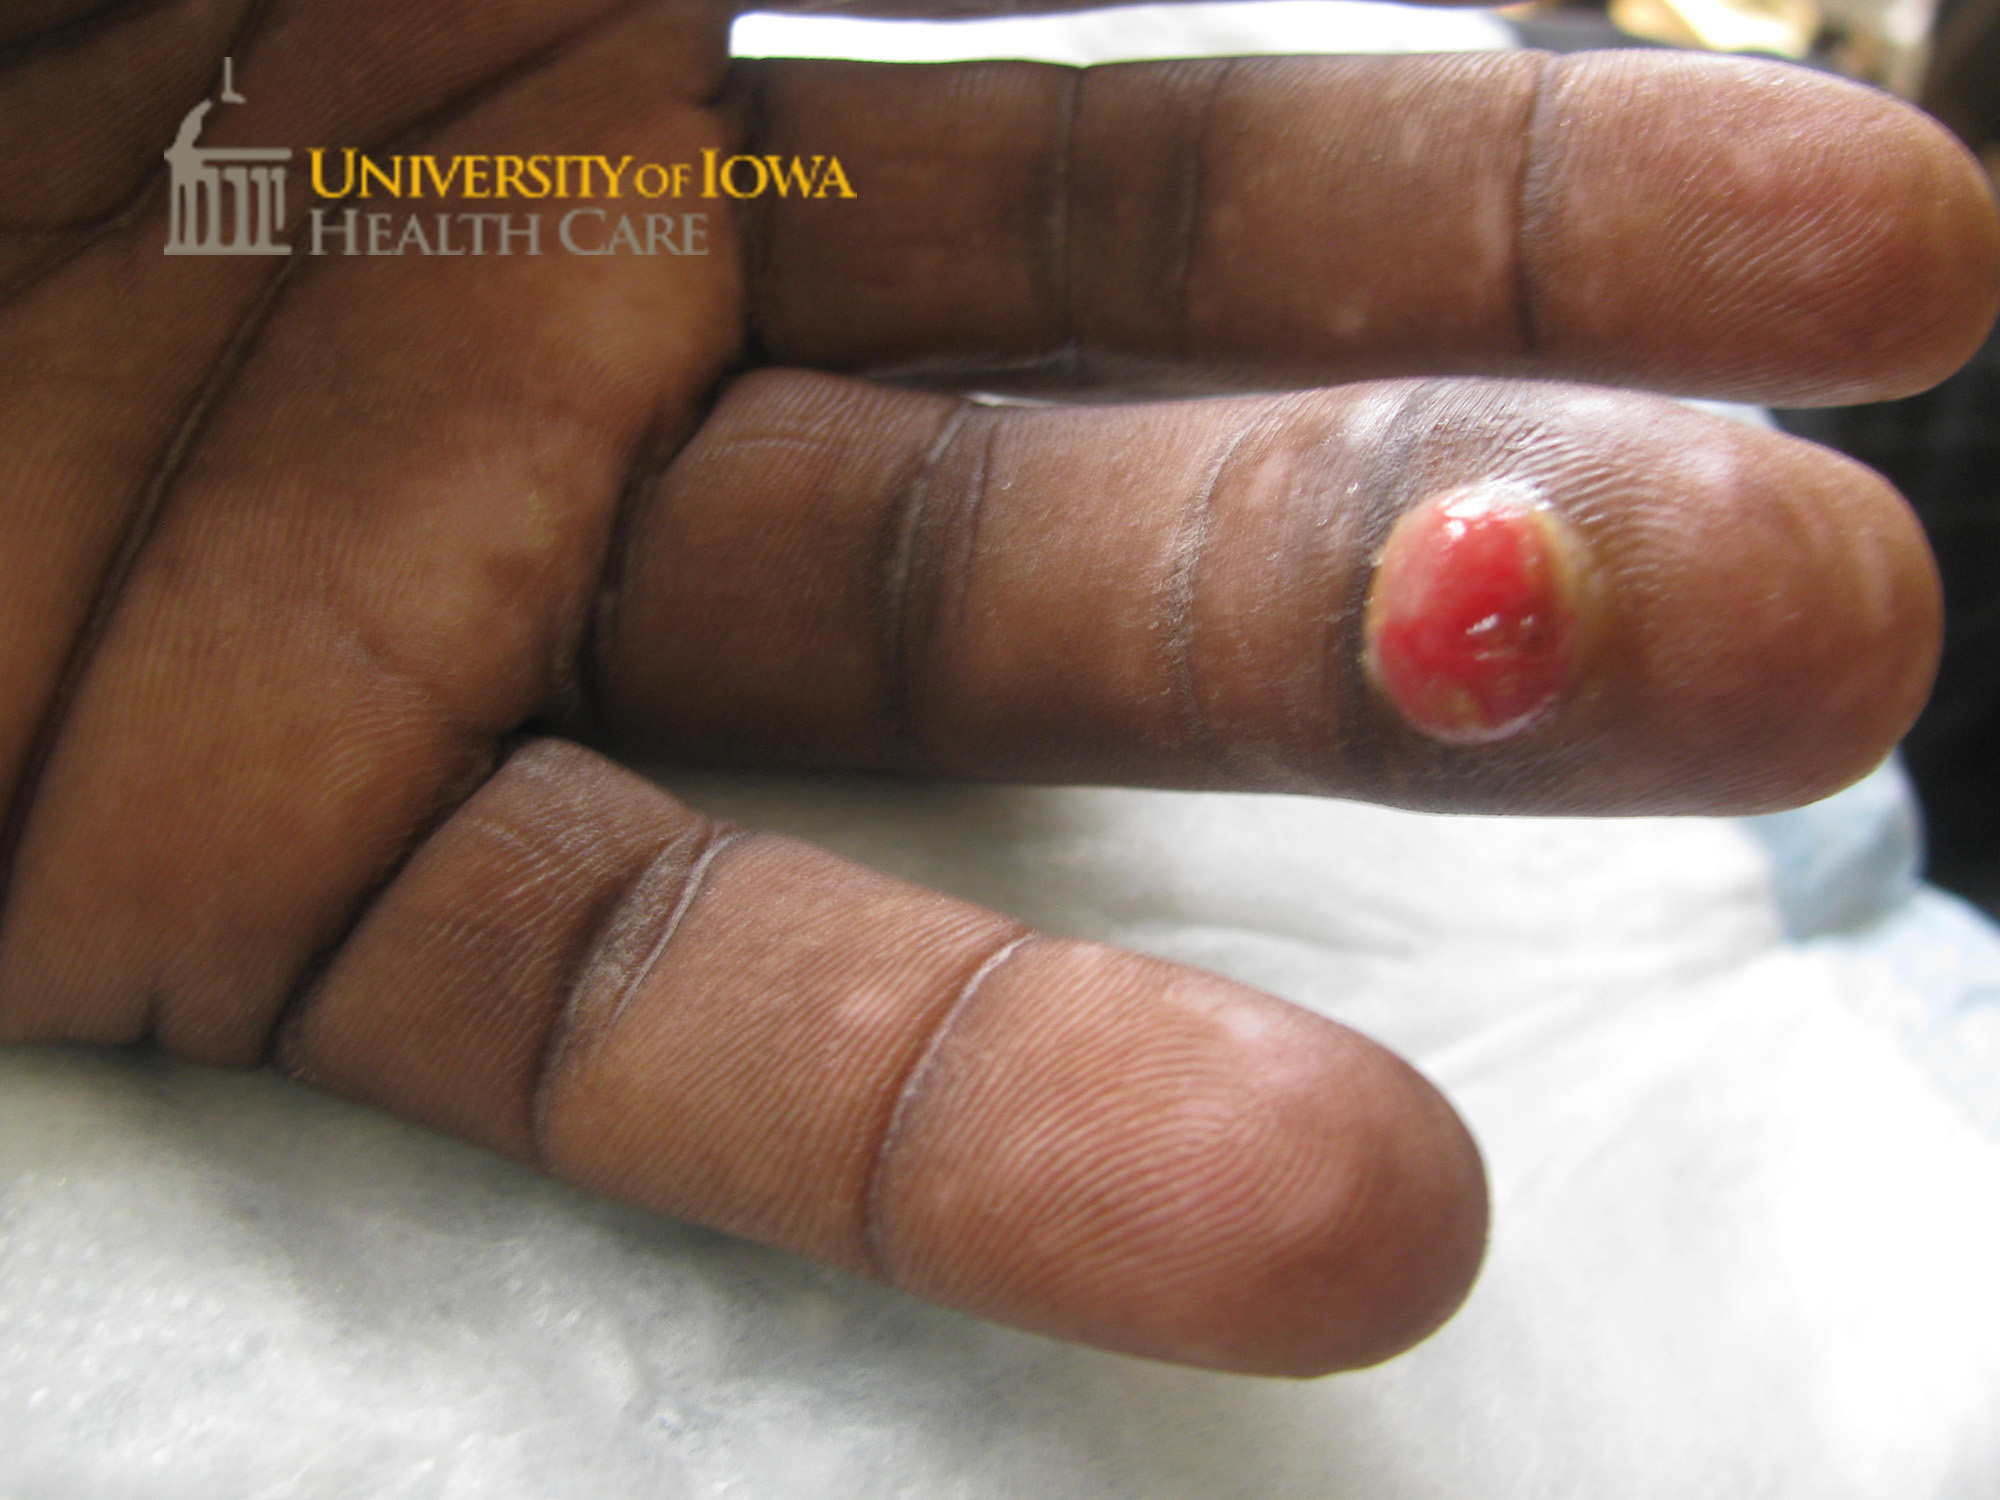 Bright red papule with collarette of scale on the 4th ventral finger. (click images for higher resolution).